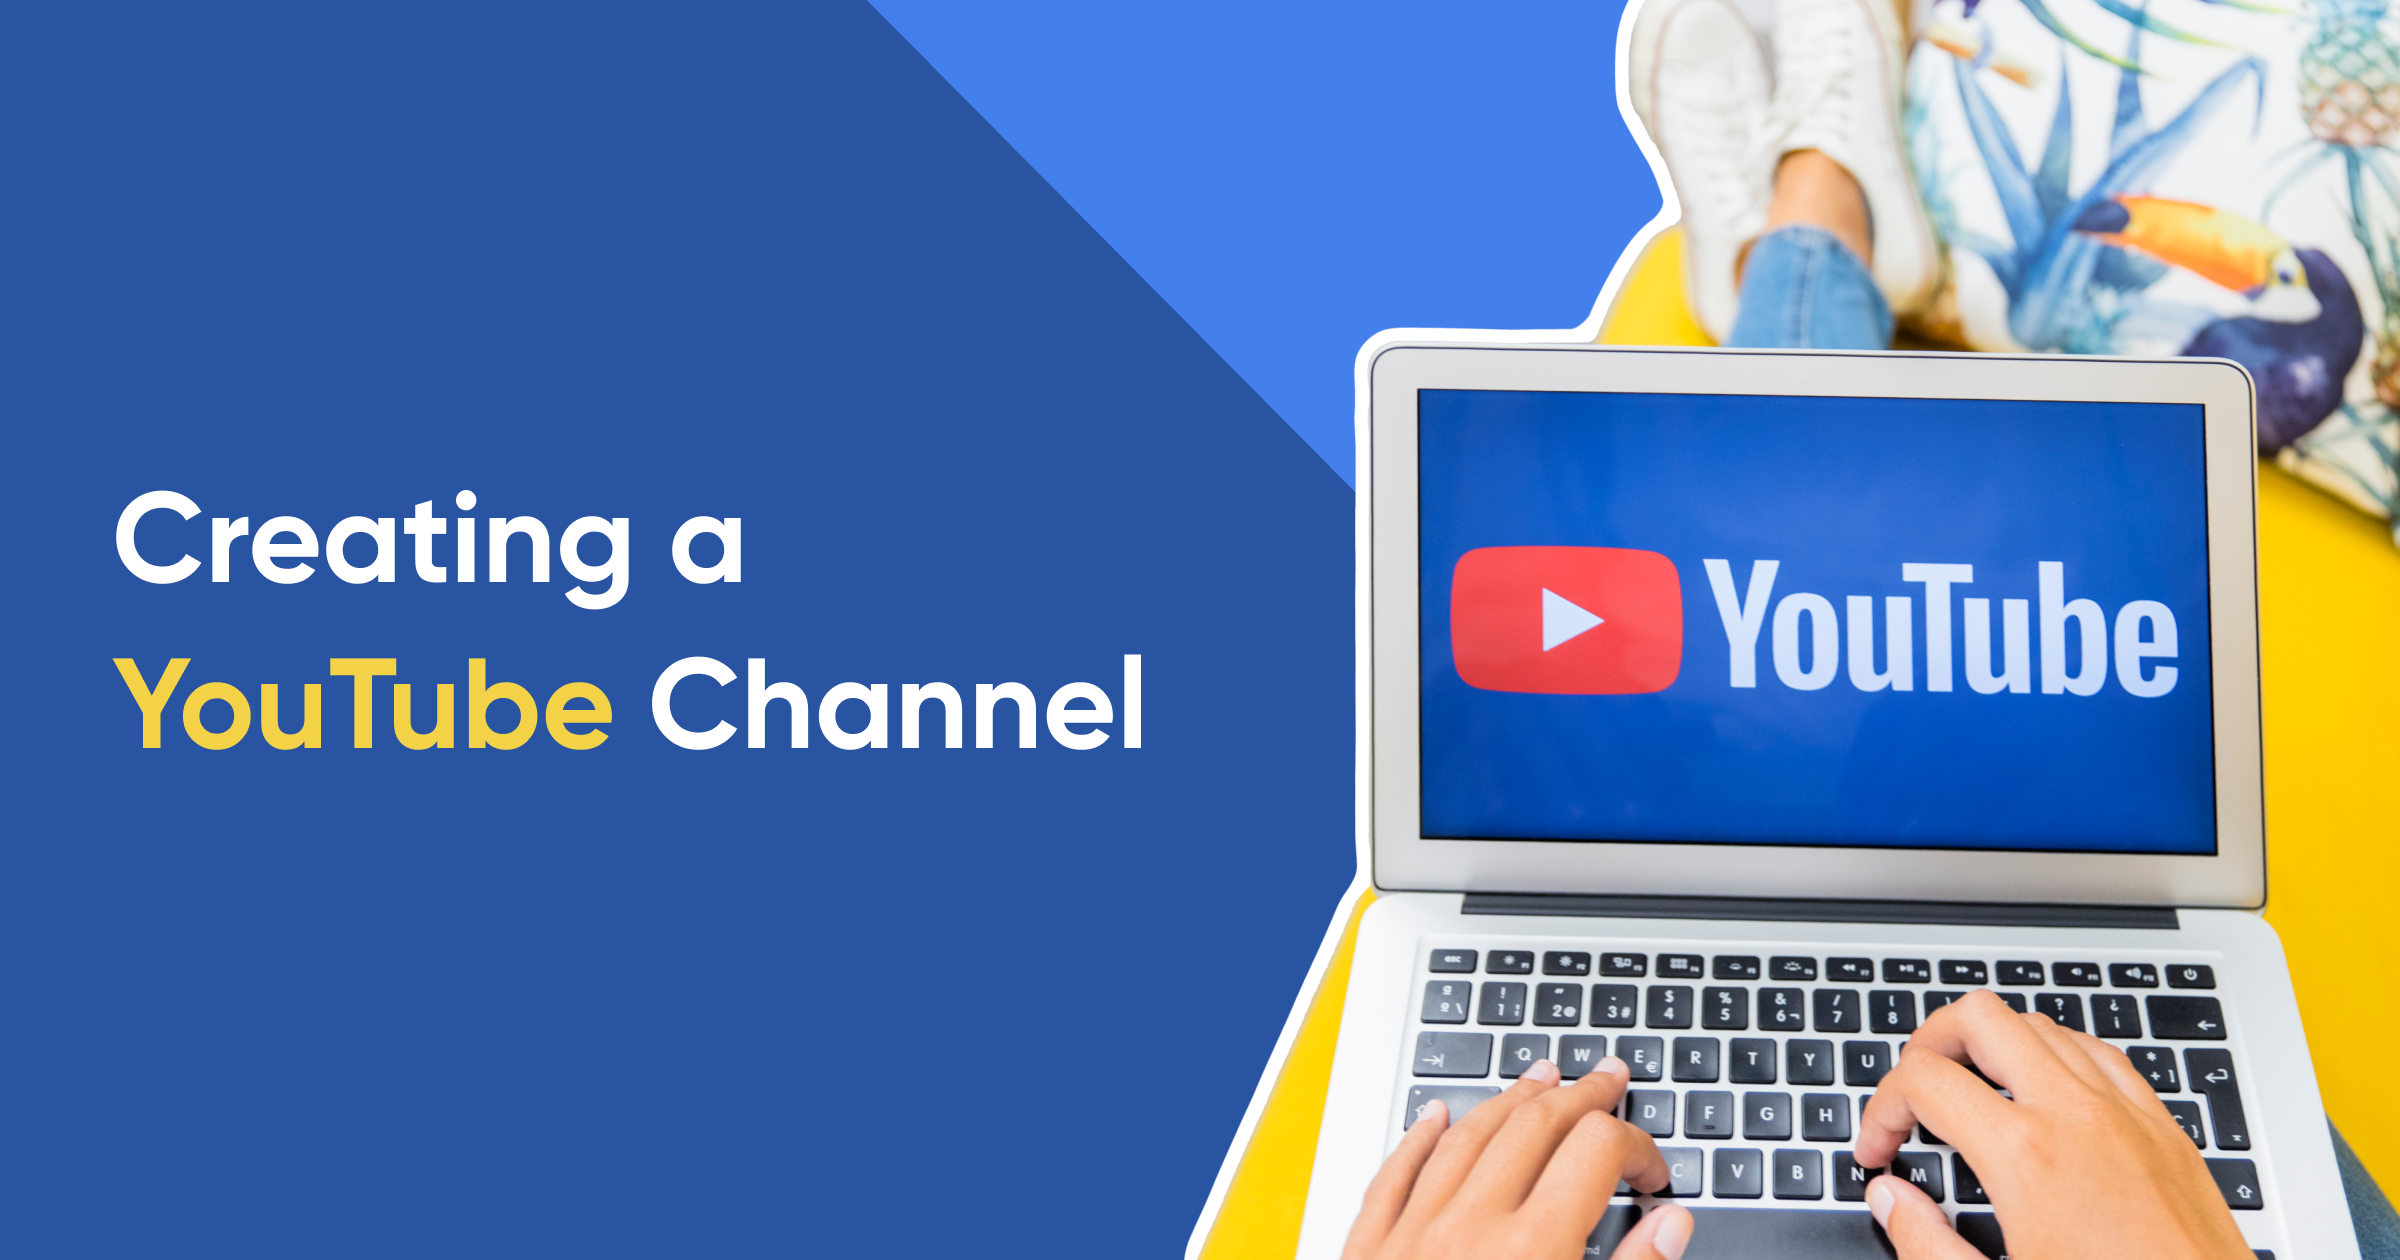 Creating a YouTube Channel for Your Brand (Is It a Good Idea?)